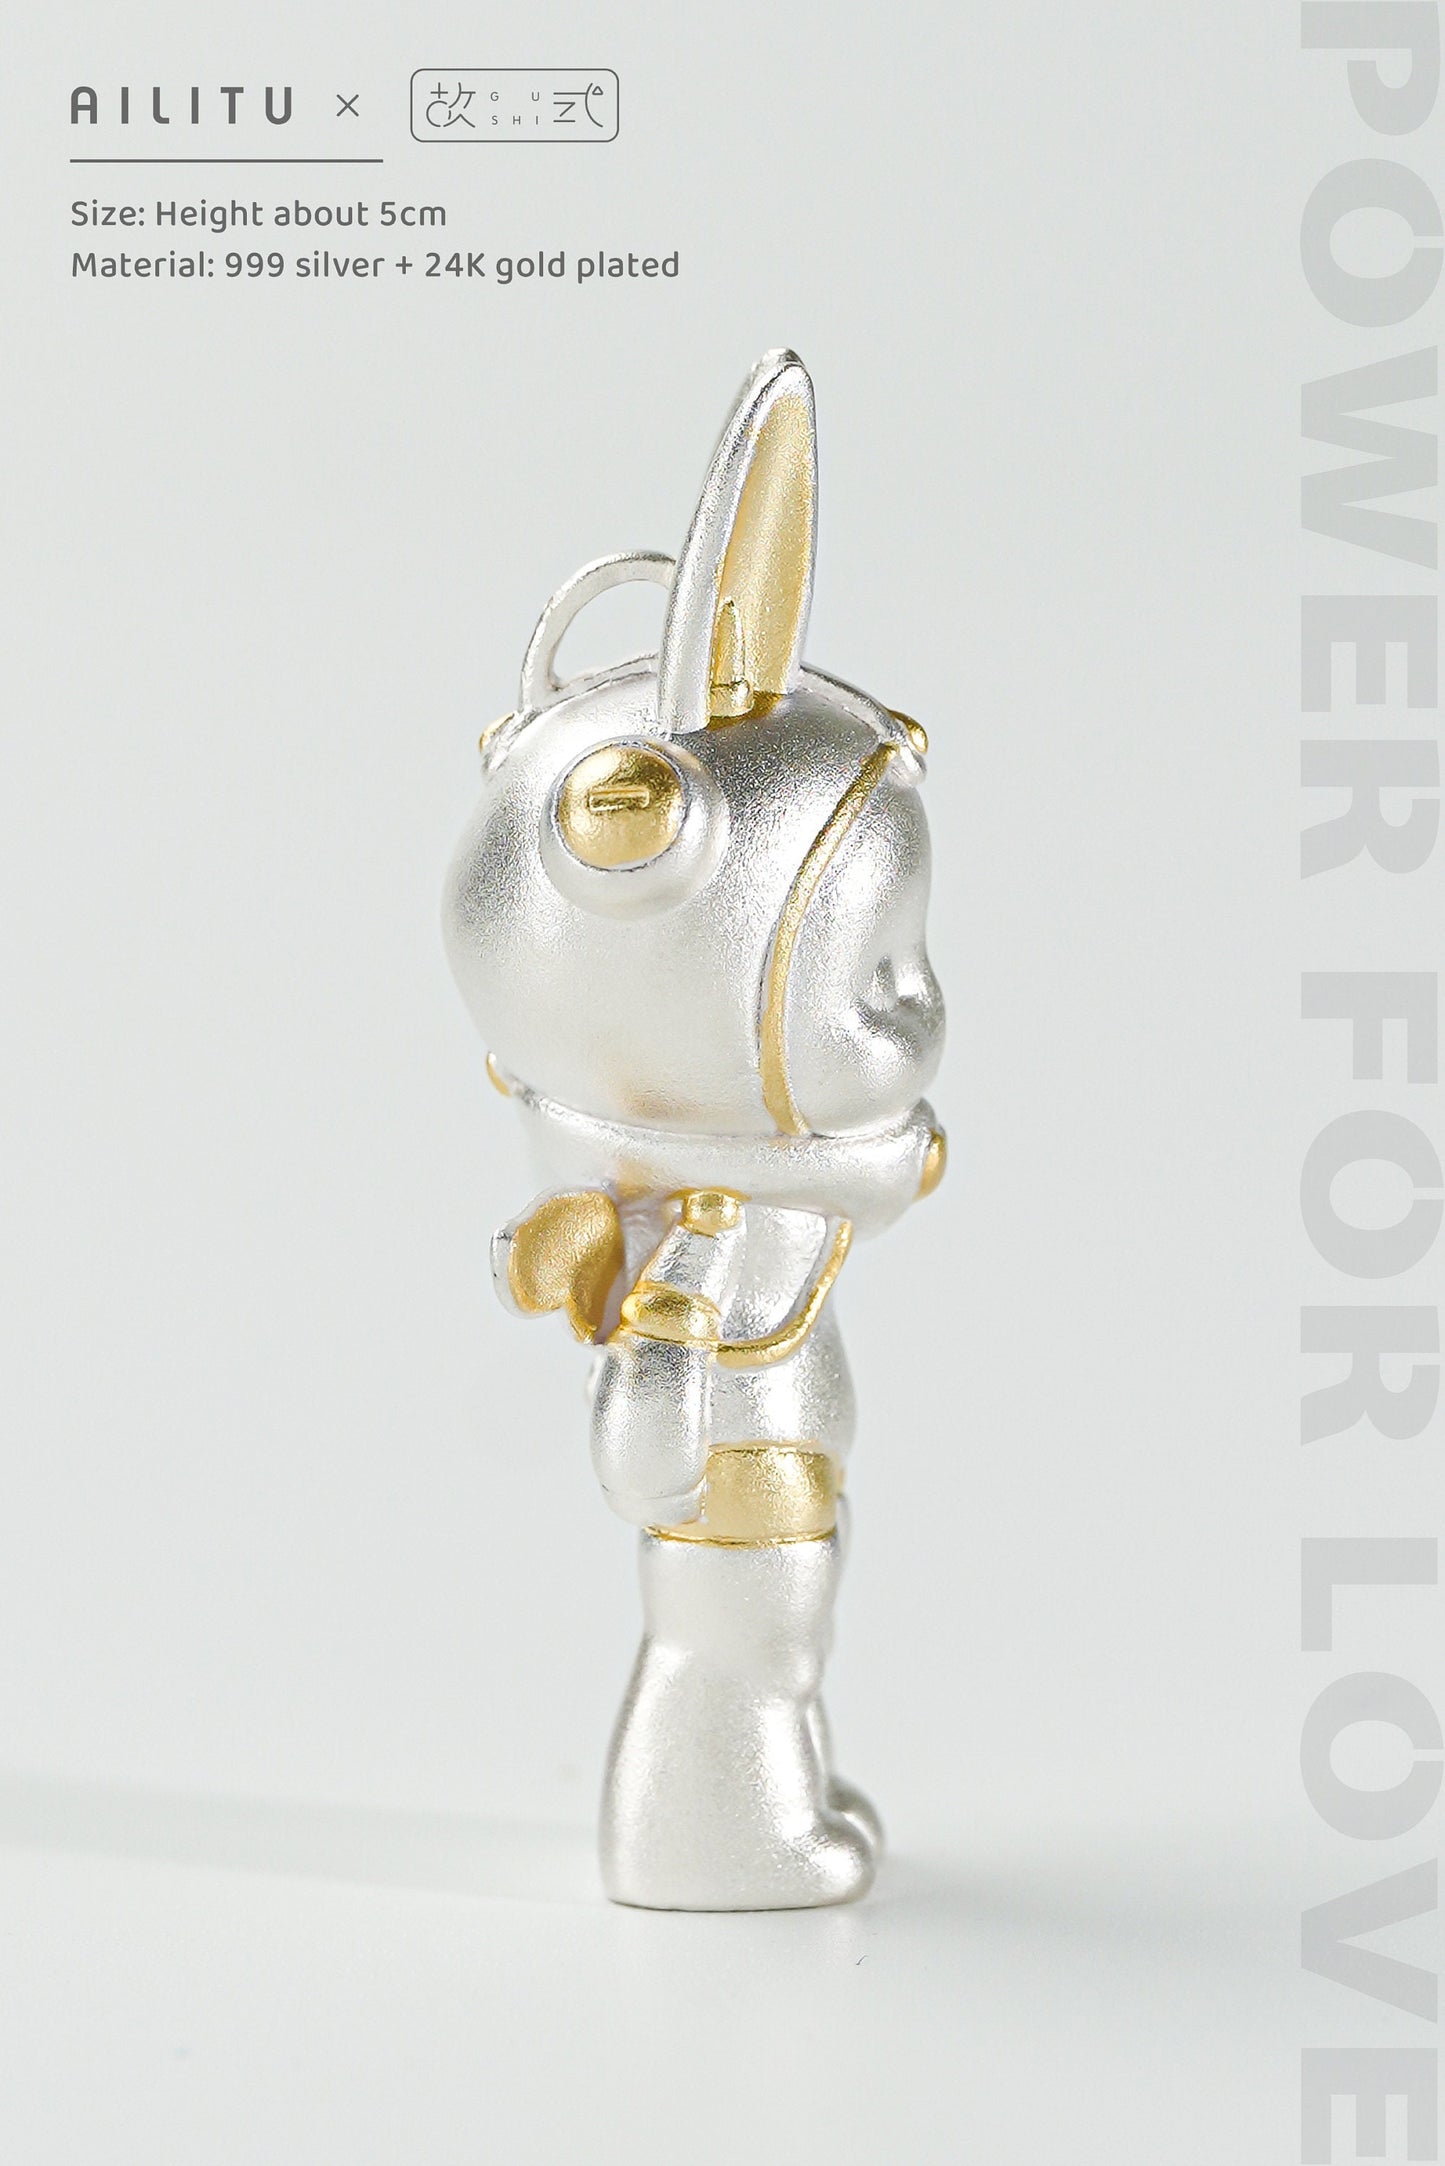 Jewelry/Silver Pendant/AILITU/Rabbit/Bunny/Pure Silver/24K Gold Plated/Height 1.97'' (5 cm)